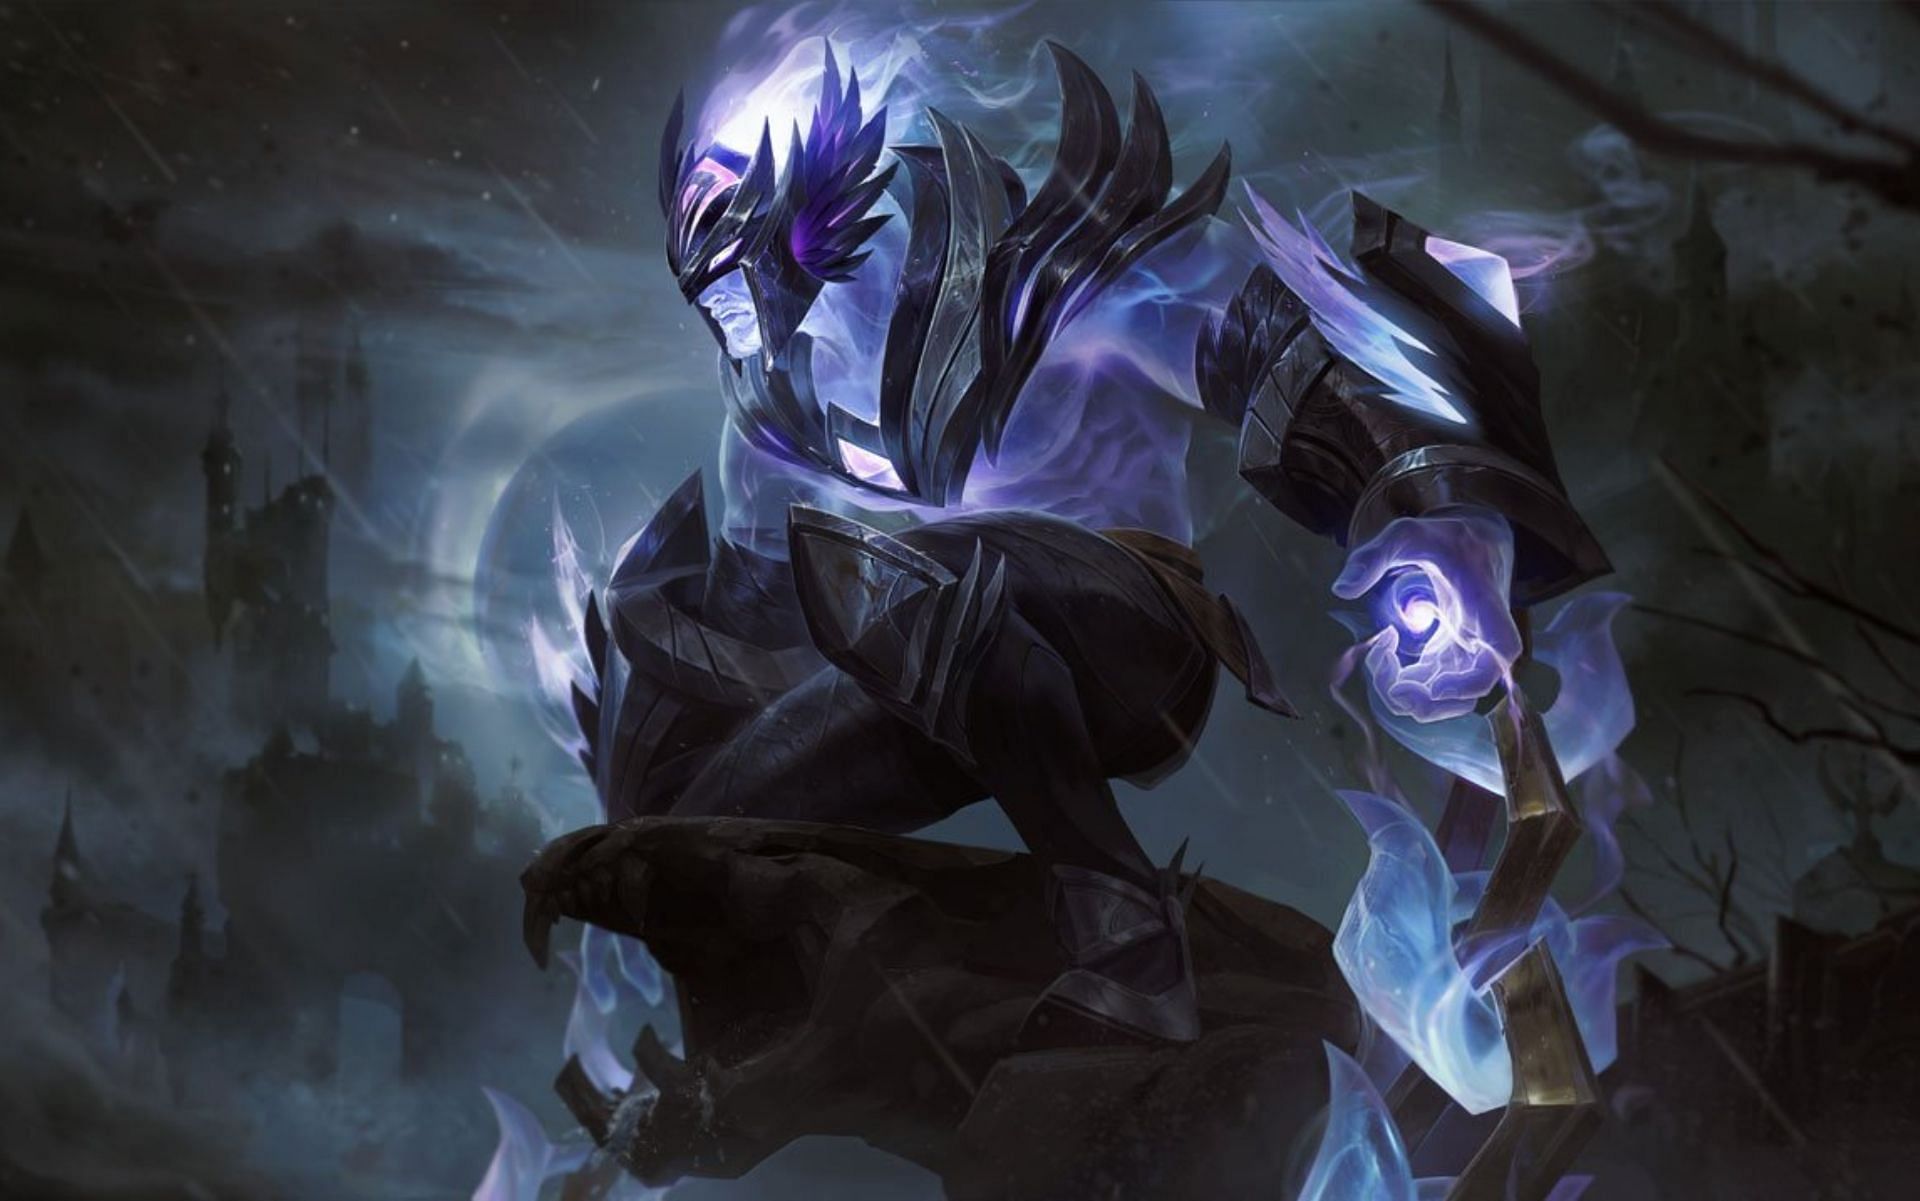 Fans feel disappointed yet again as the Ashen Knight Sylas skin fails to meet expectations (Image via Riot Games)